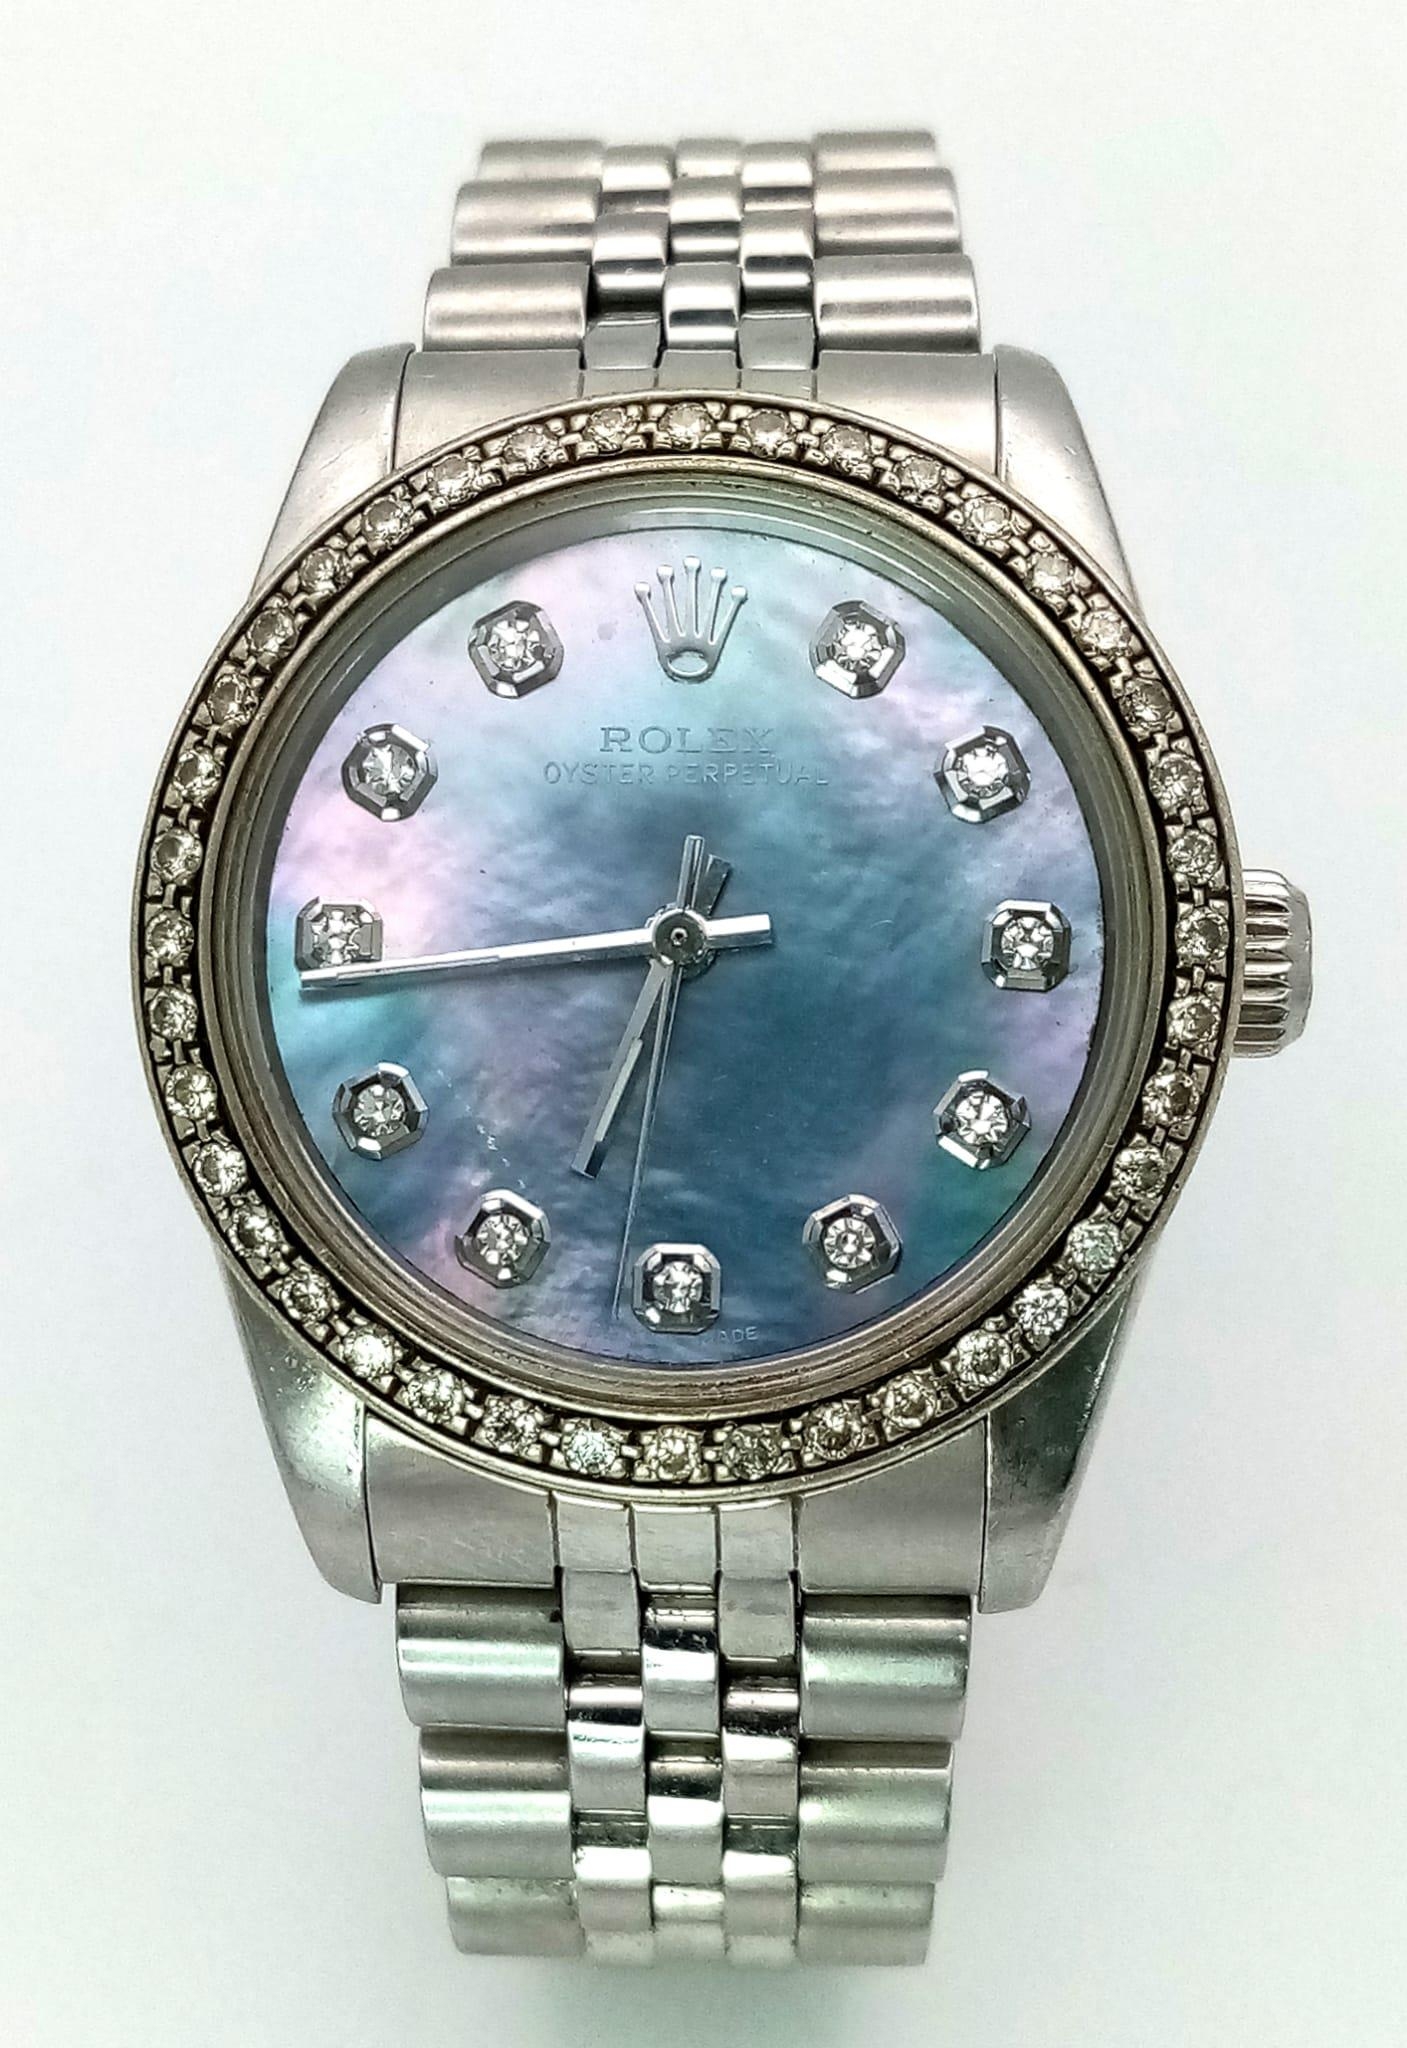 A LADIES ROLEX DRESS WATCH WITH DIAMOND NUMERALS AND BEZEL , MOTHER OF PEARL DIAL AND AUTOMATIC